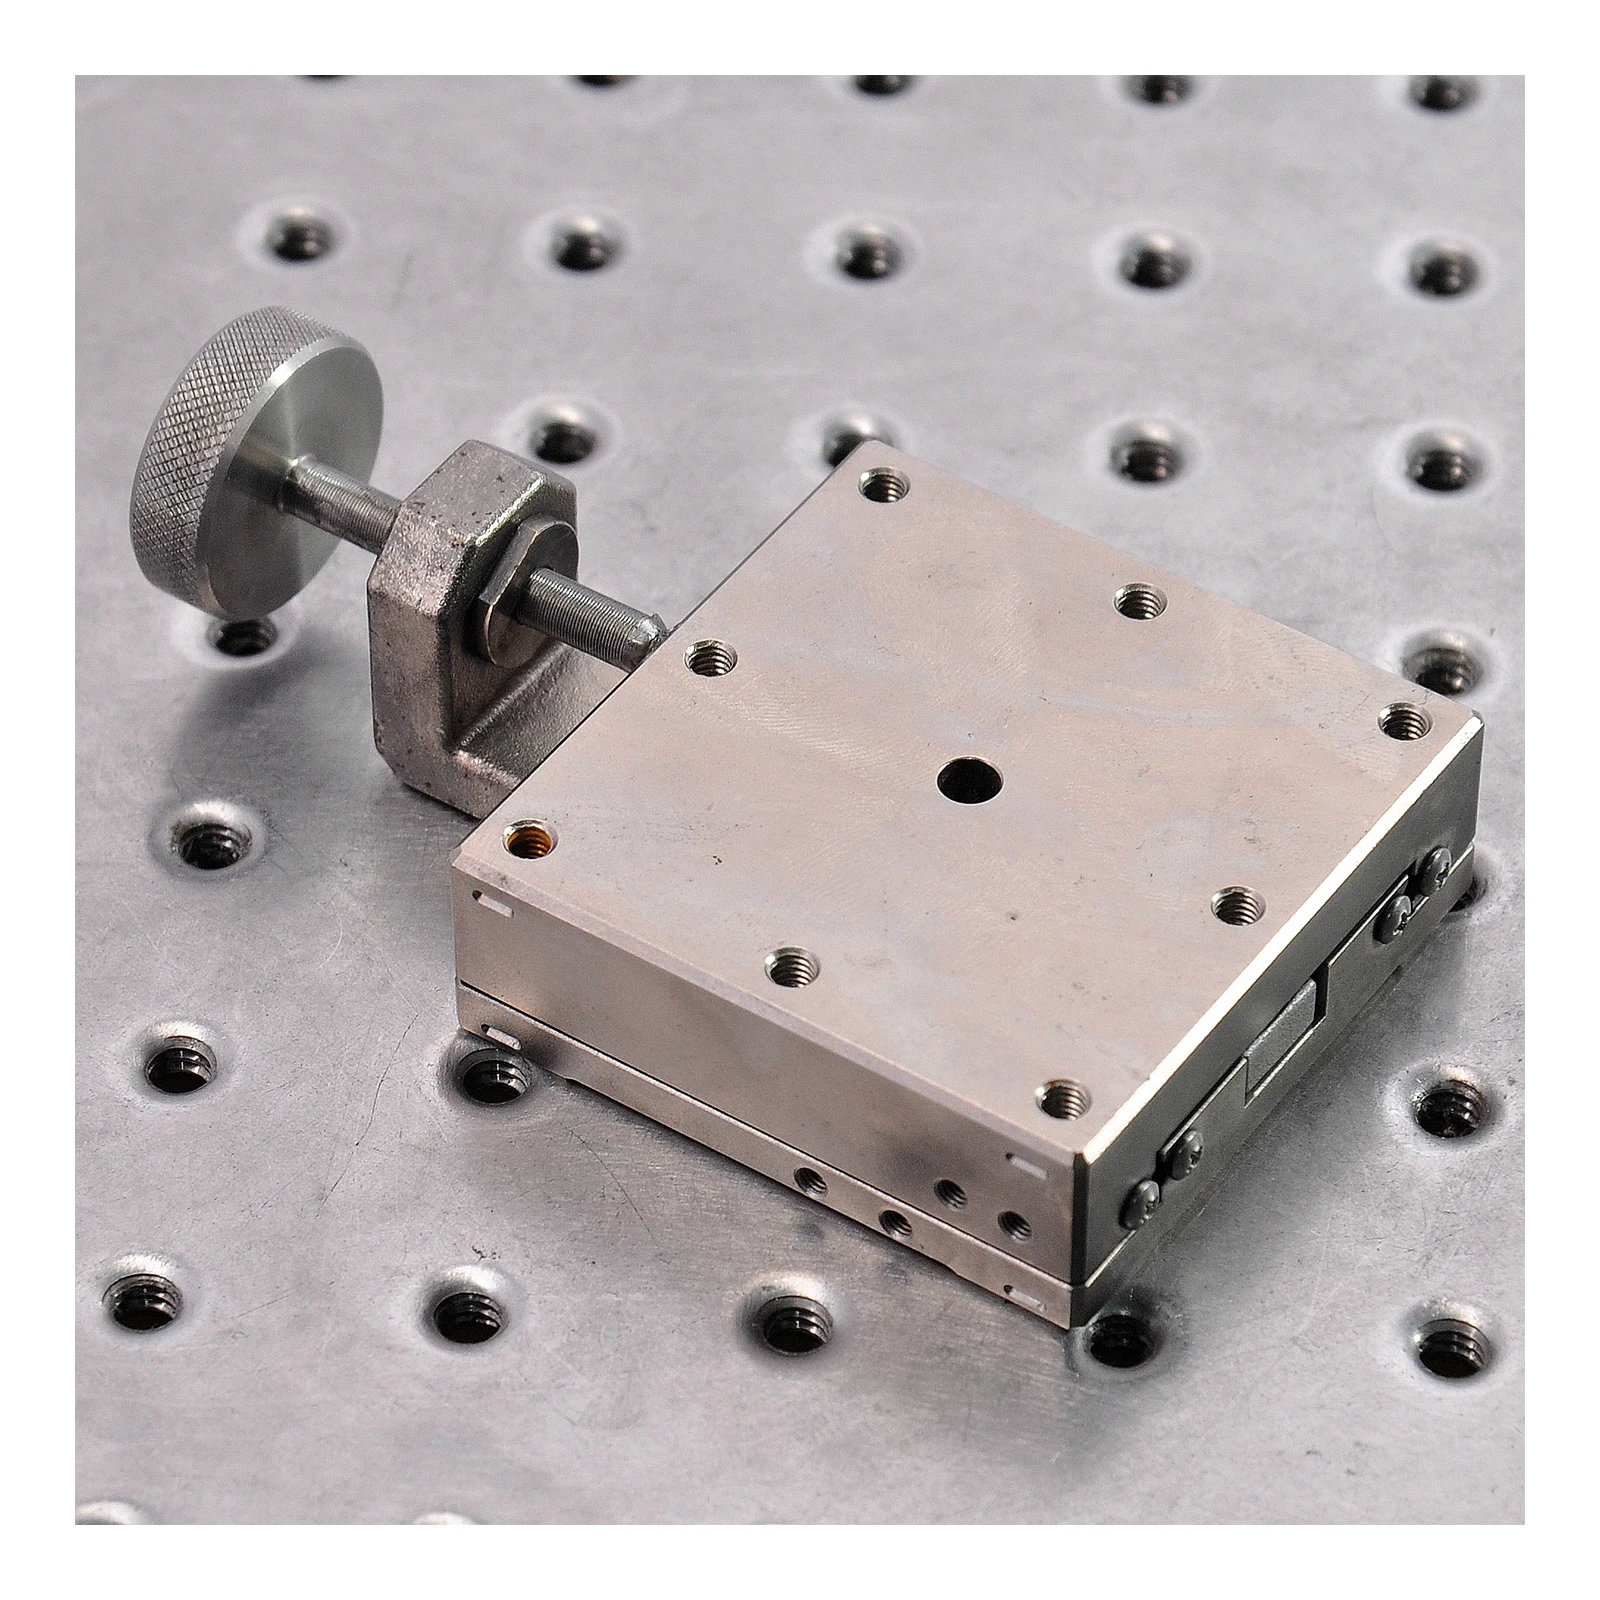 Y-Axis Manual Optical Precision Workbench Linear Guide Displacement Fine-Tuning Slide Table 60mm Thick 20 Stainless Steel